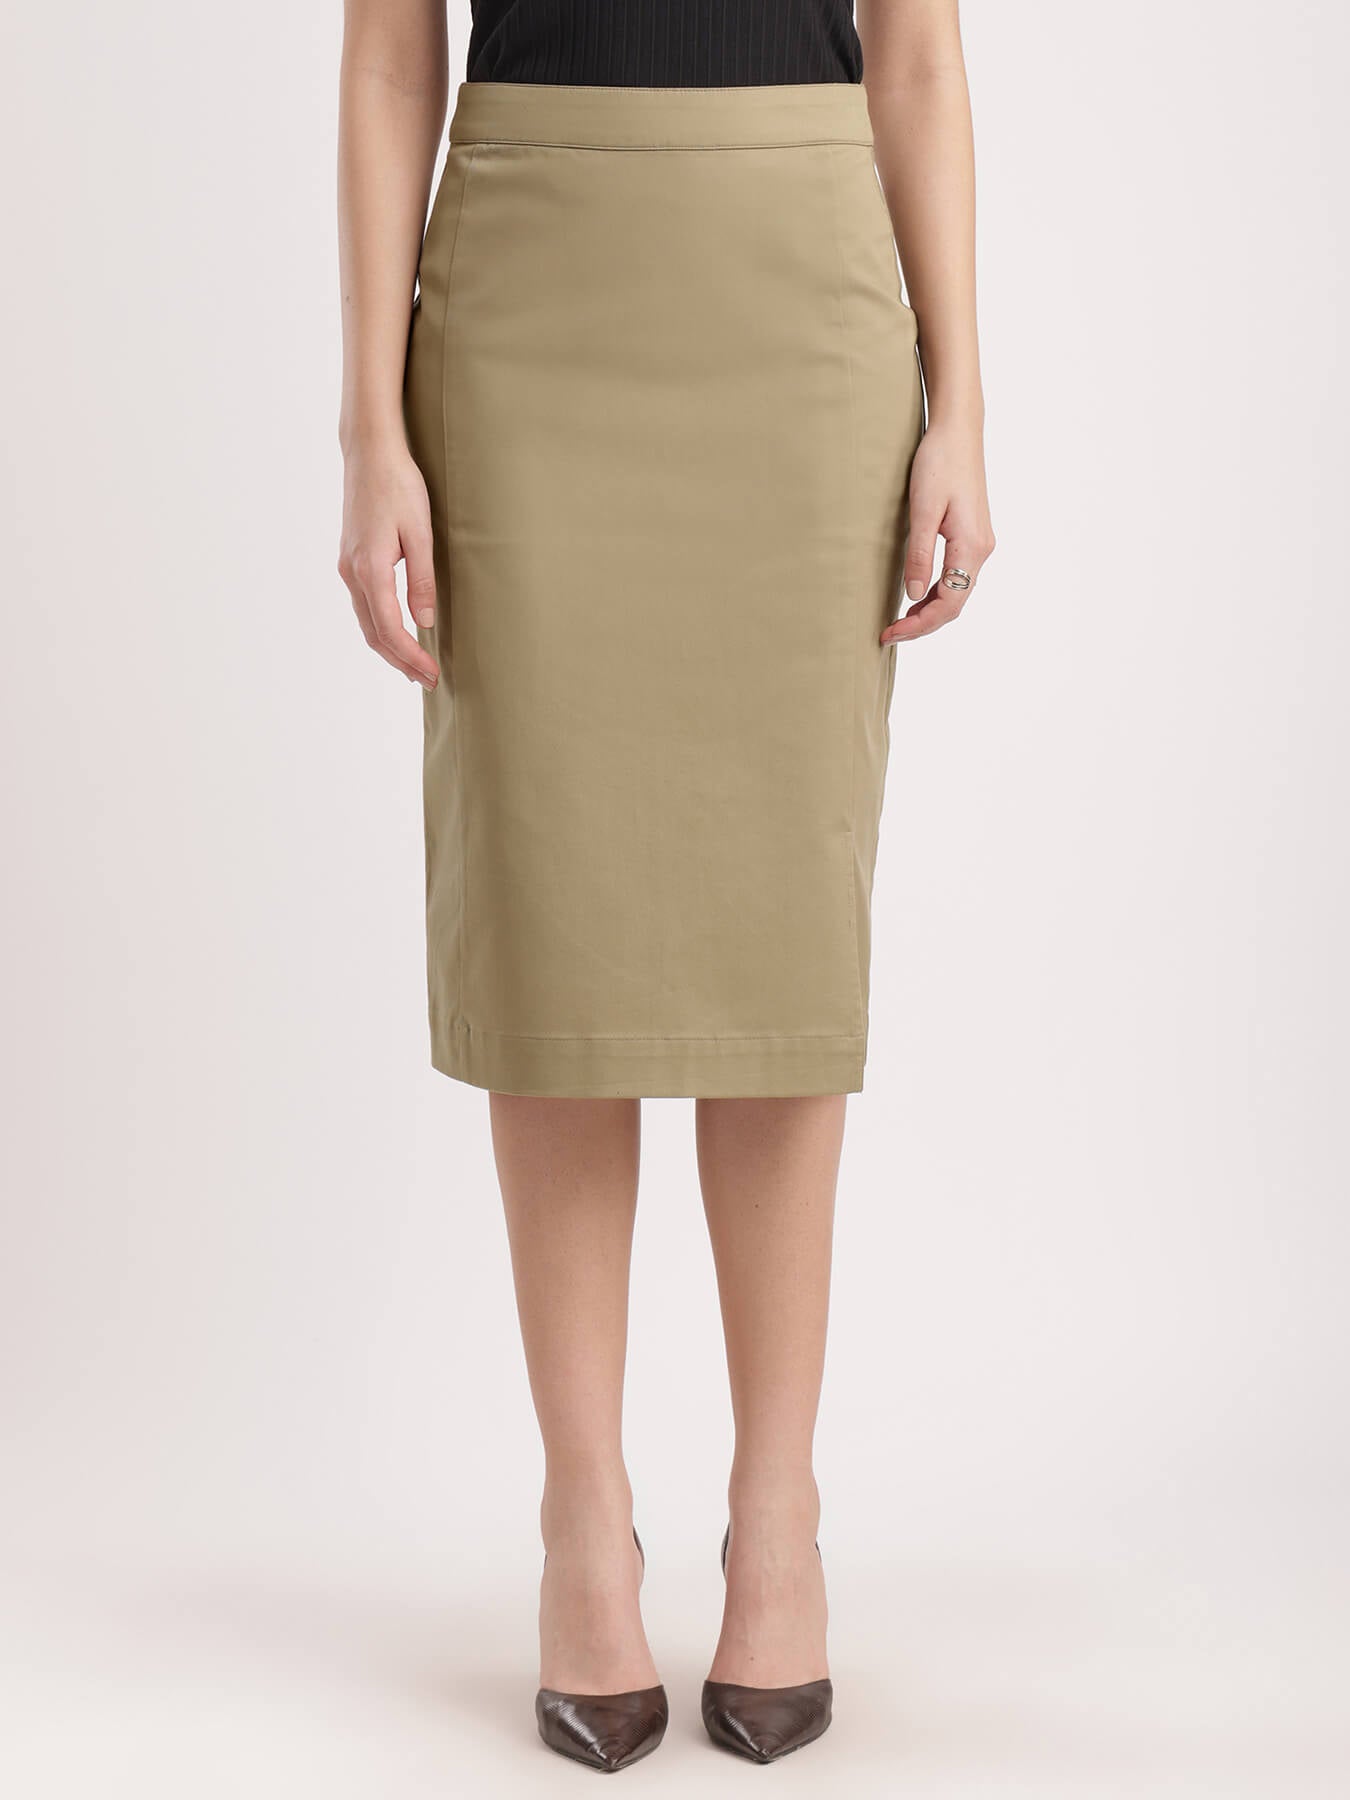 Stretchable Pencil Skirt - Beige